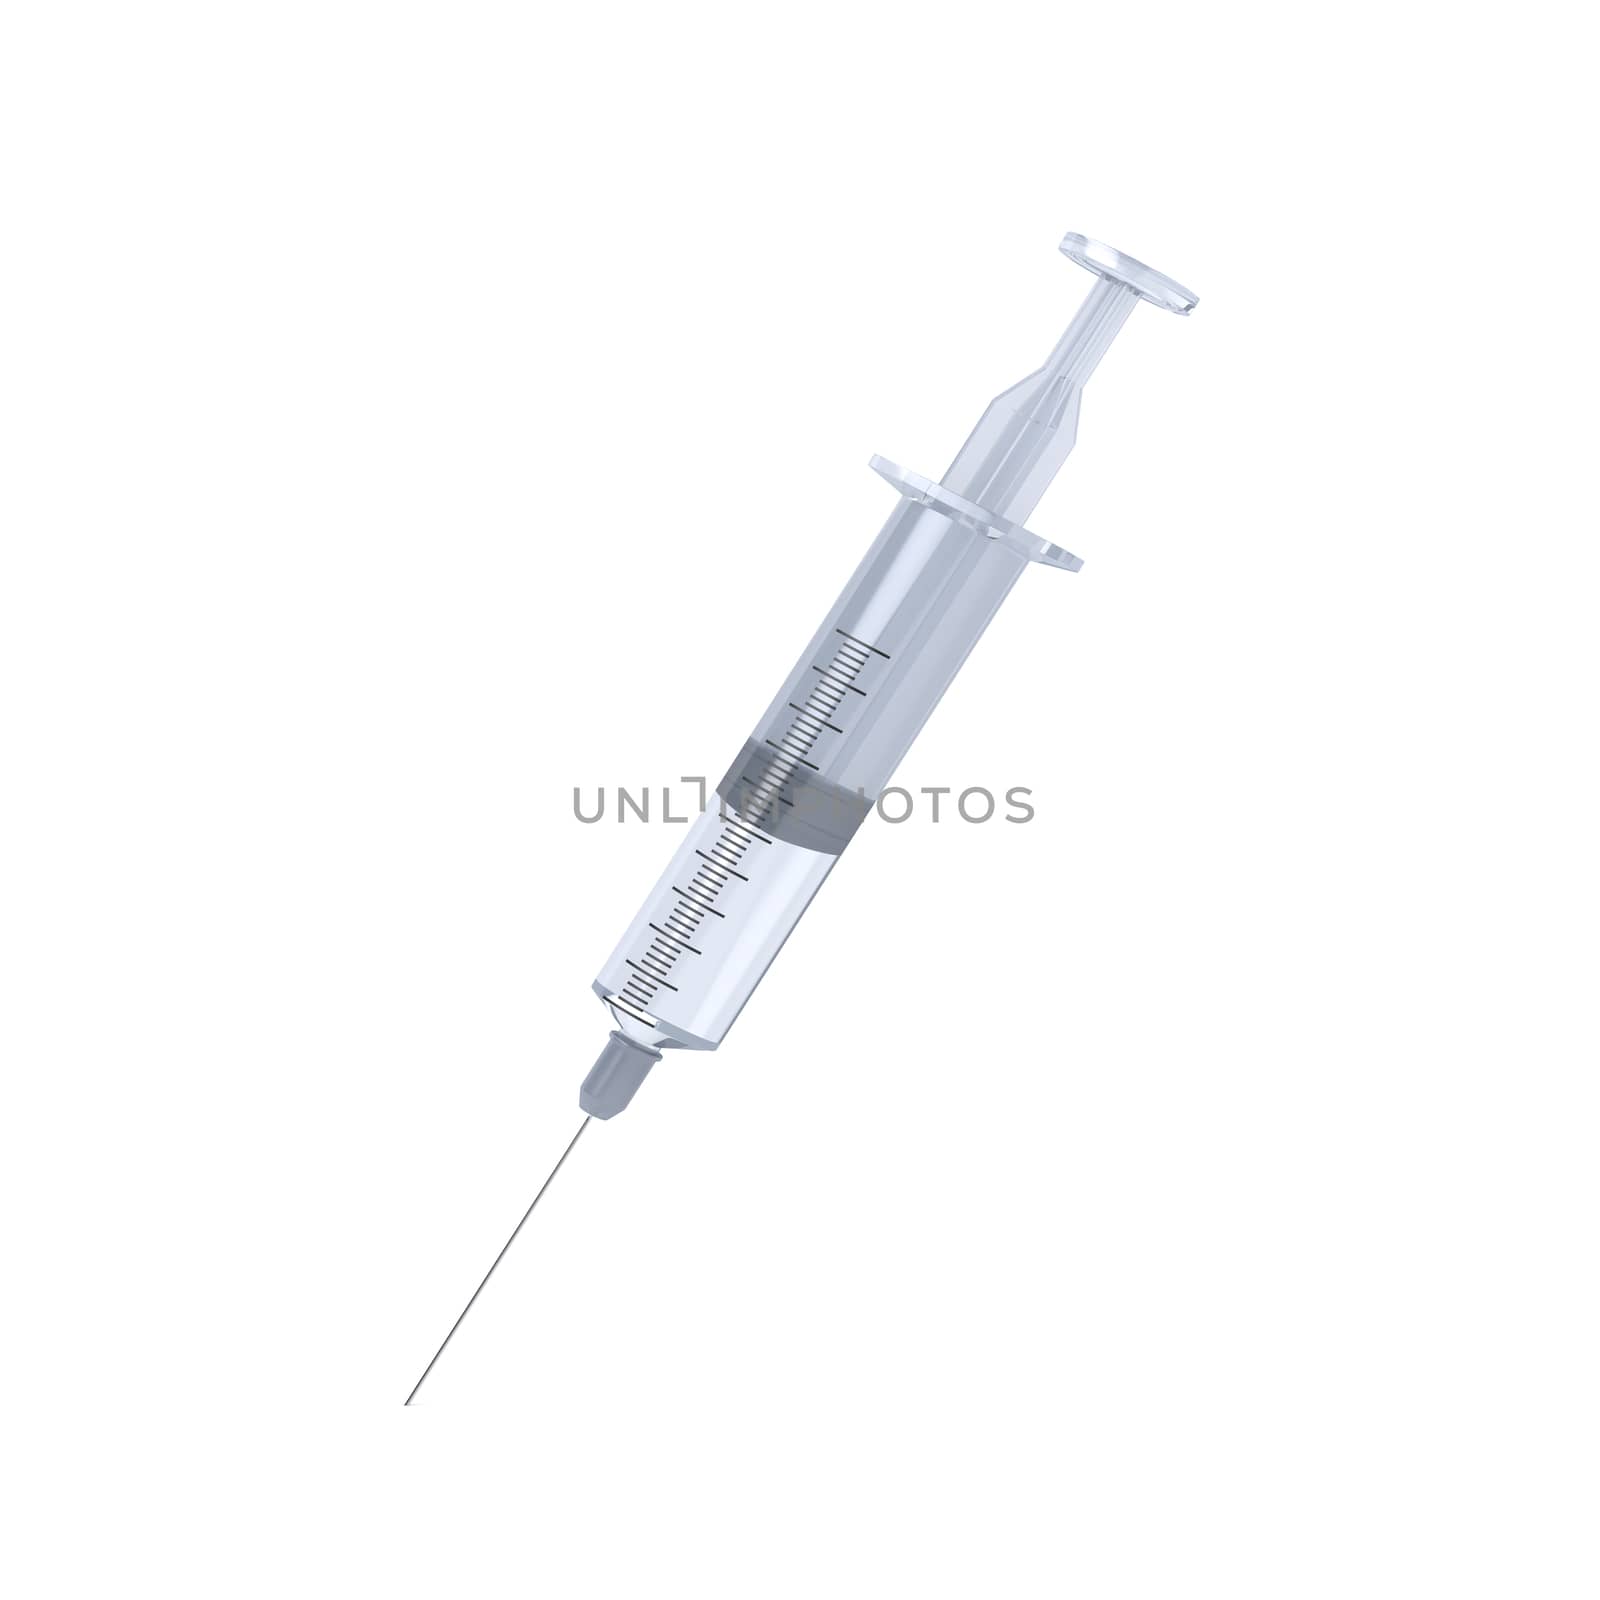 Syringe on white by magraphics